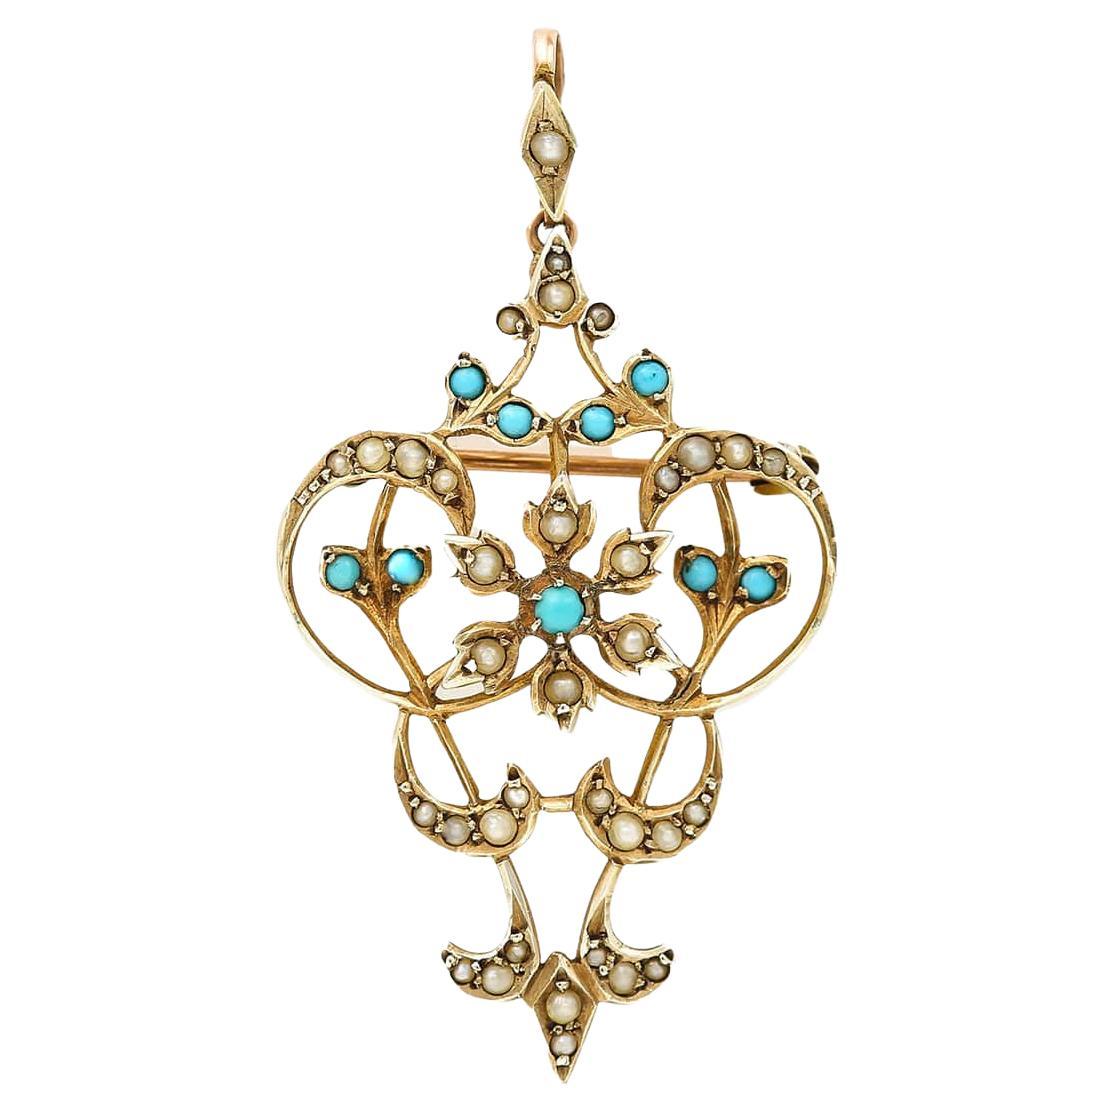 Edwardian Turquoise and Pearl Pendant Brooch Circa 1915